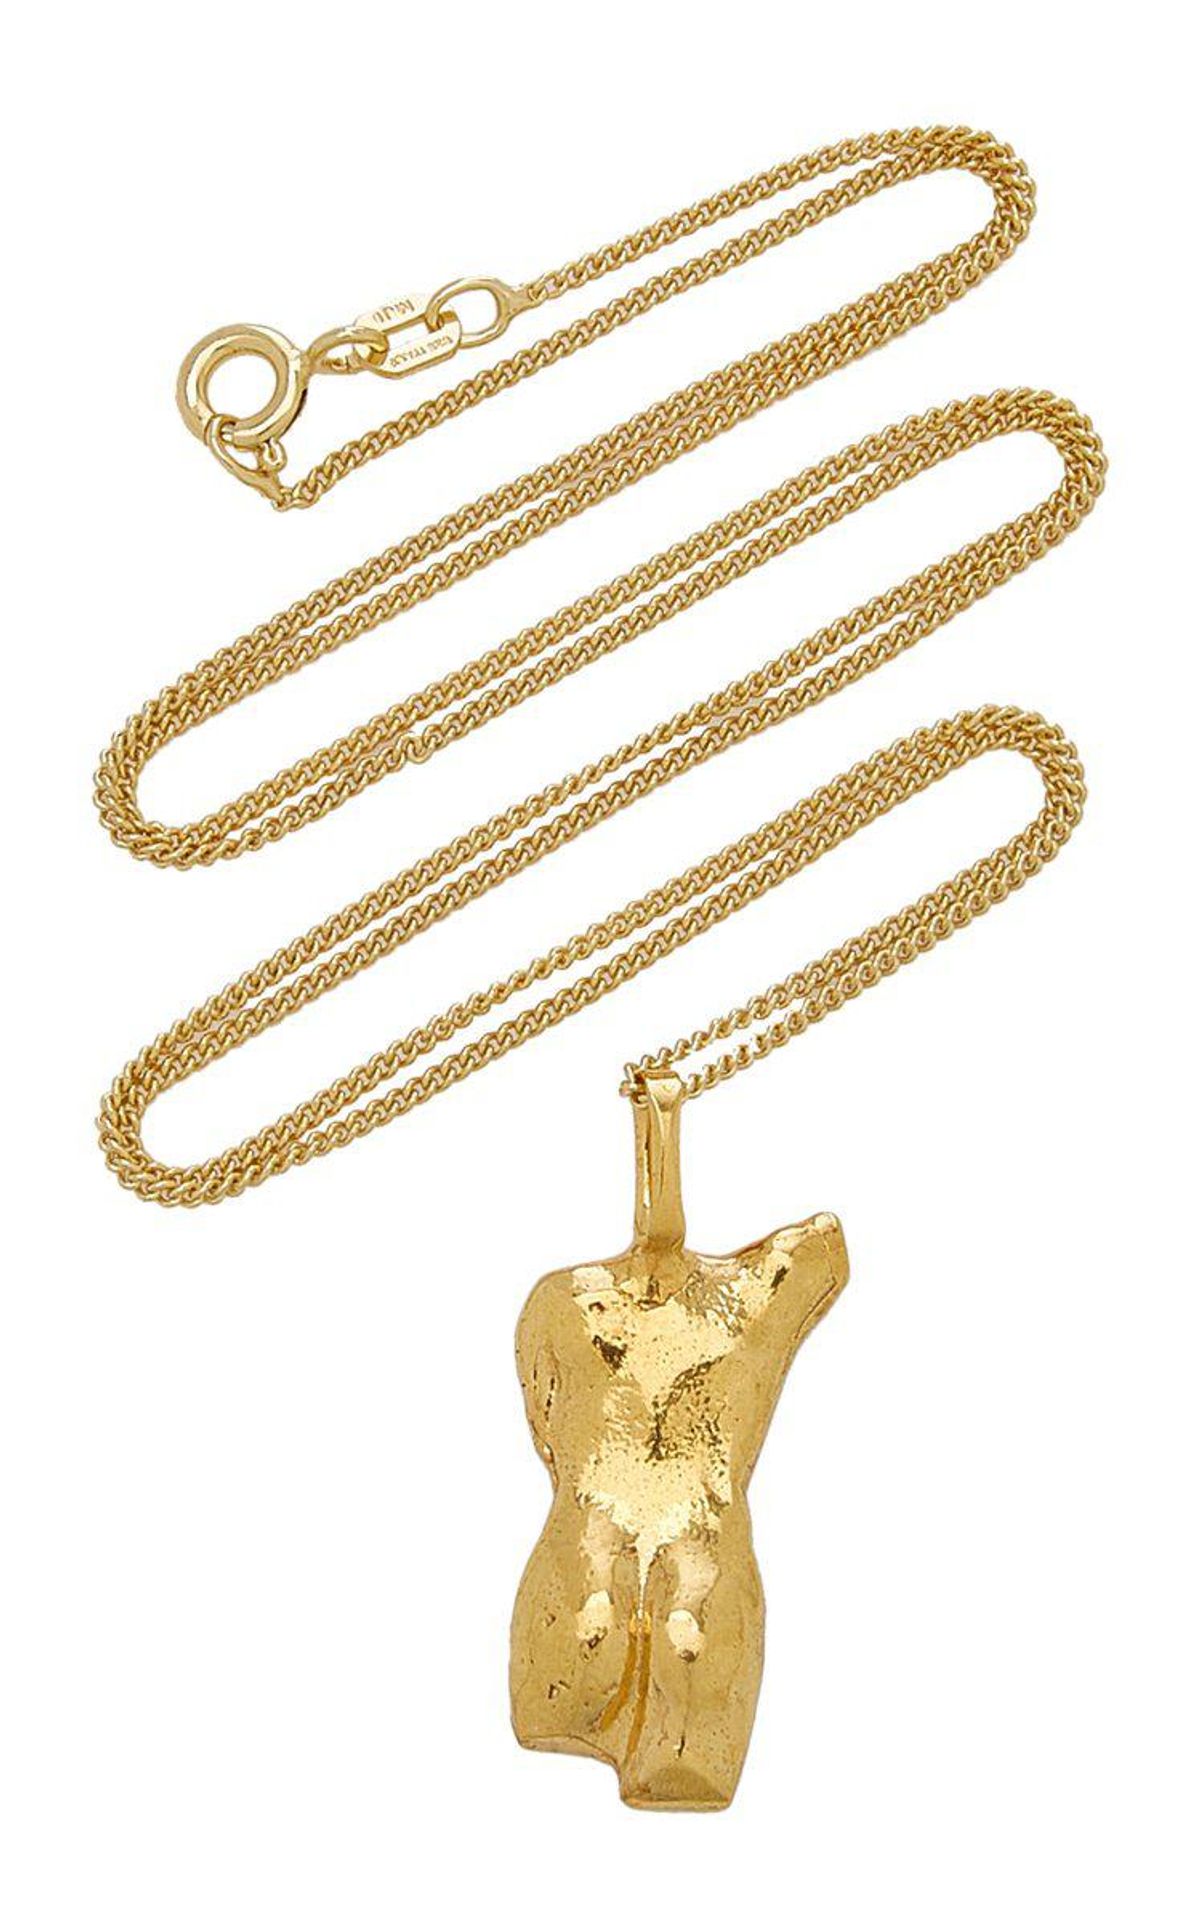 The Last Grace 24k Gold-Plated Necklace